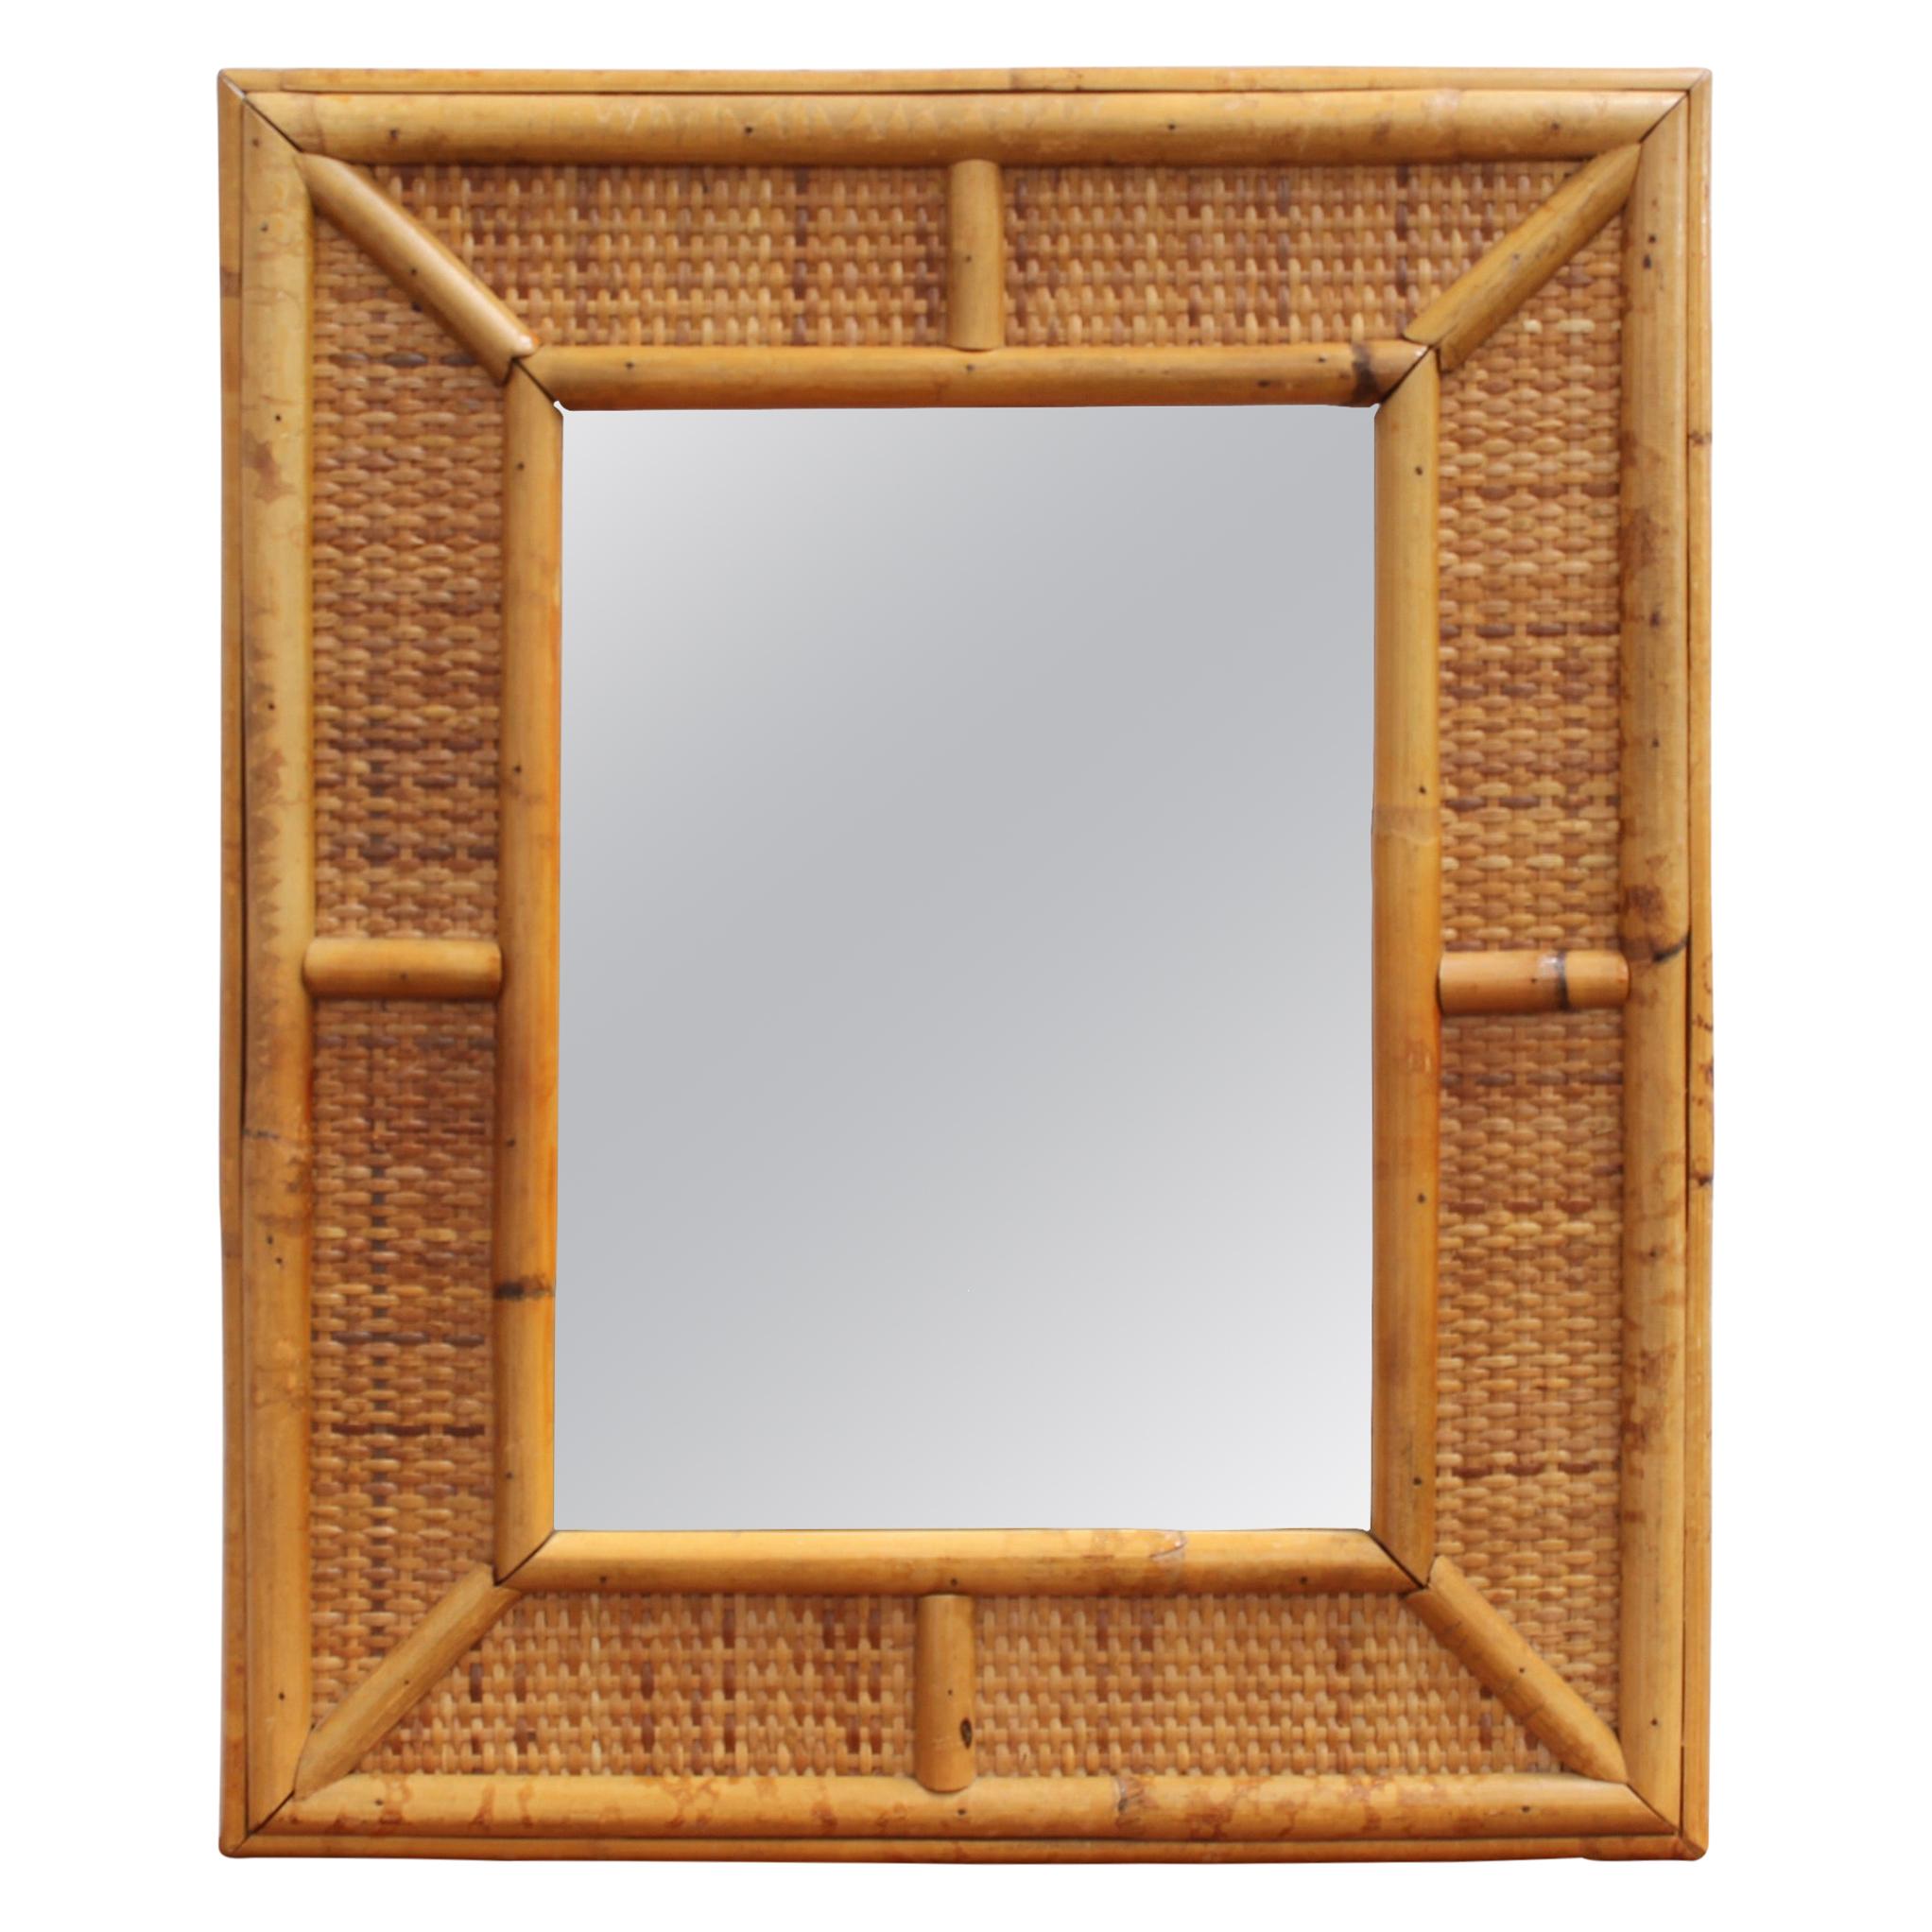 Mid-Century French Wicker and Rattan Wall Mirror, 'circa 1960s'